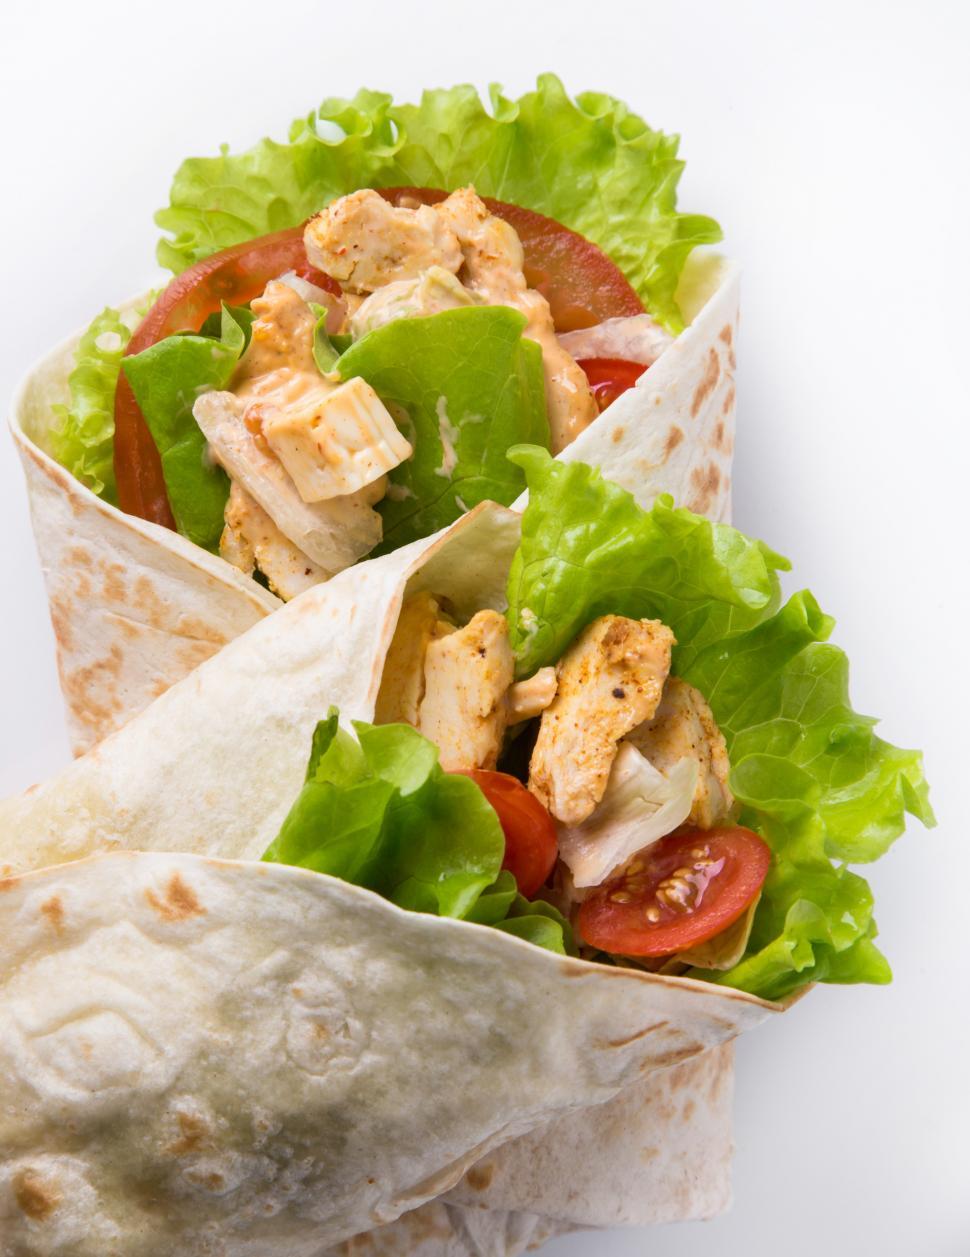 Free Image of Chicken and vegetables wrapped in a tortilla 